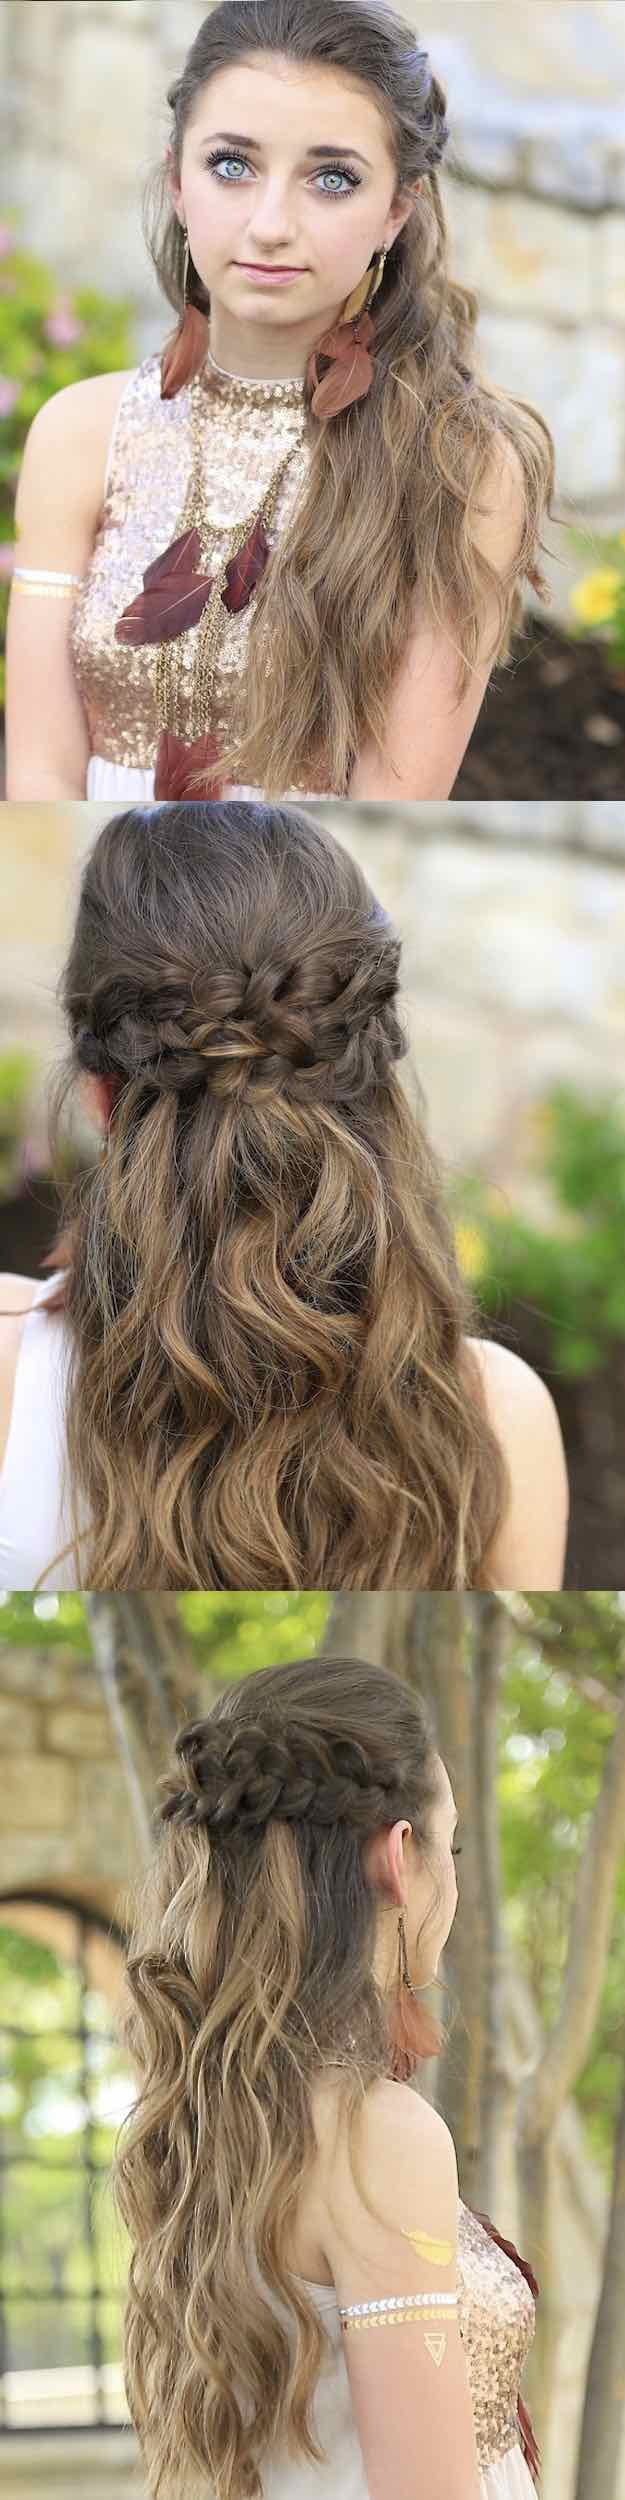 Prom Hairstyles Down With Braid
 25 Easy Half Up Half Down Hairstyle Tutorials For Prom